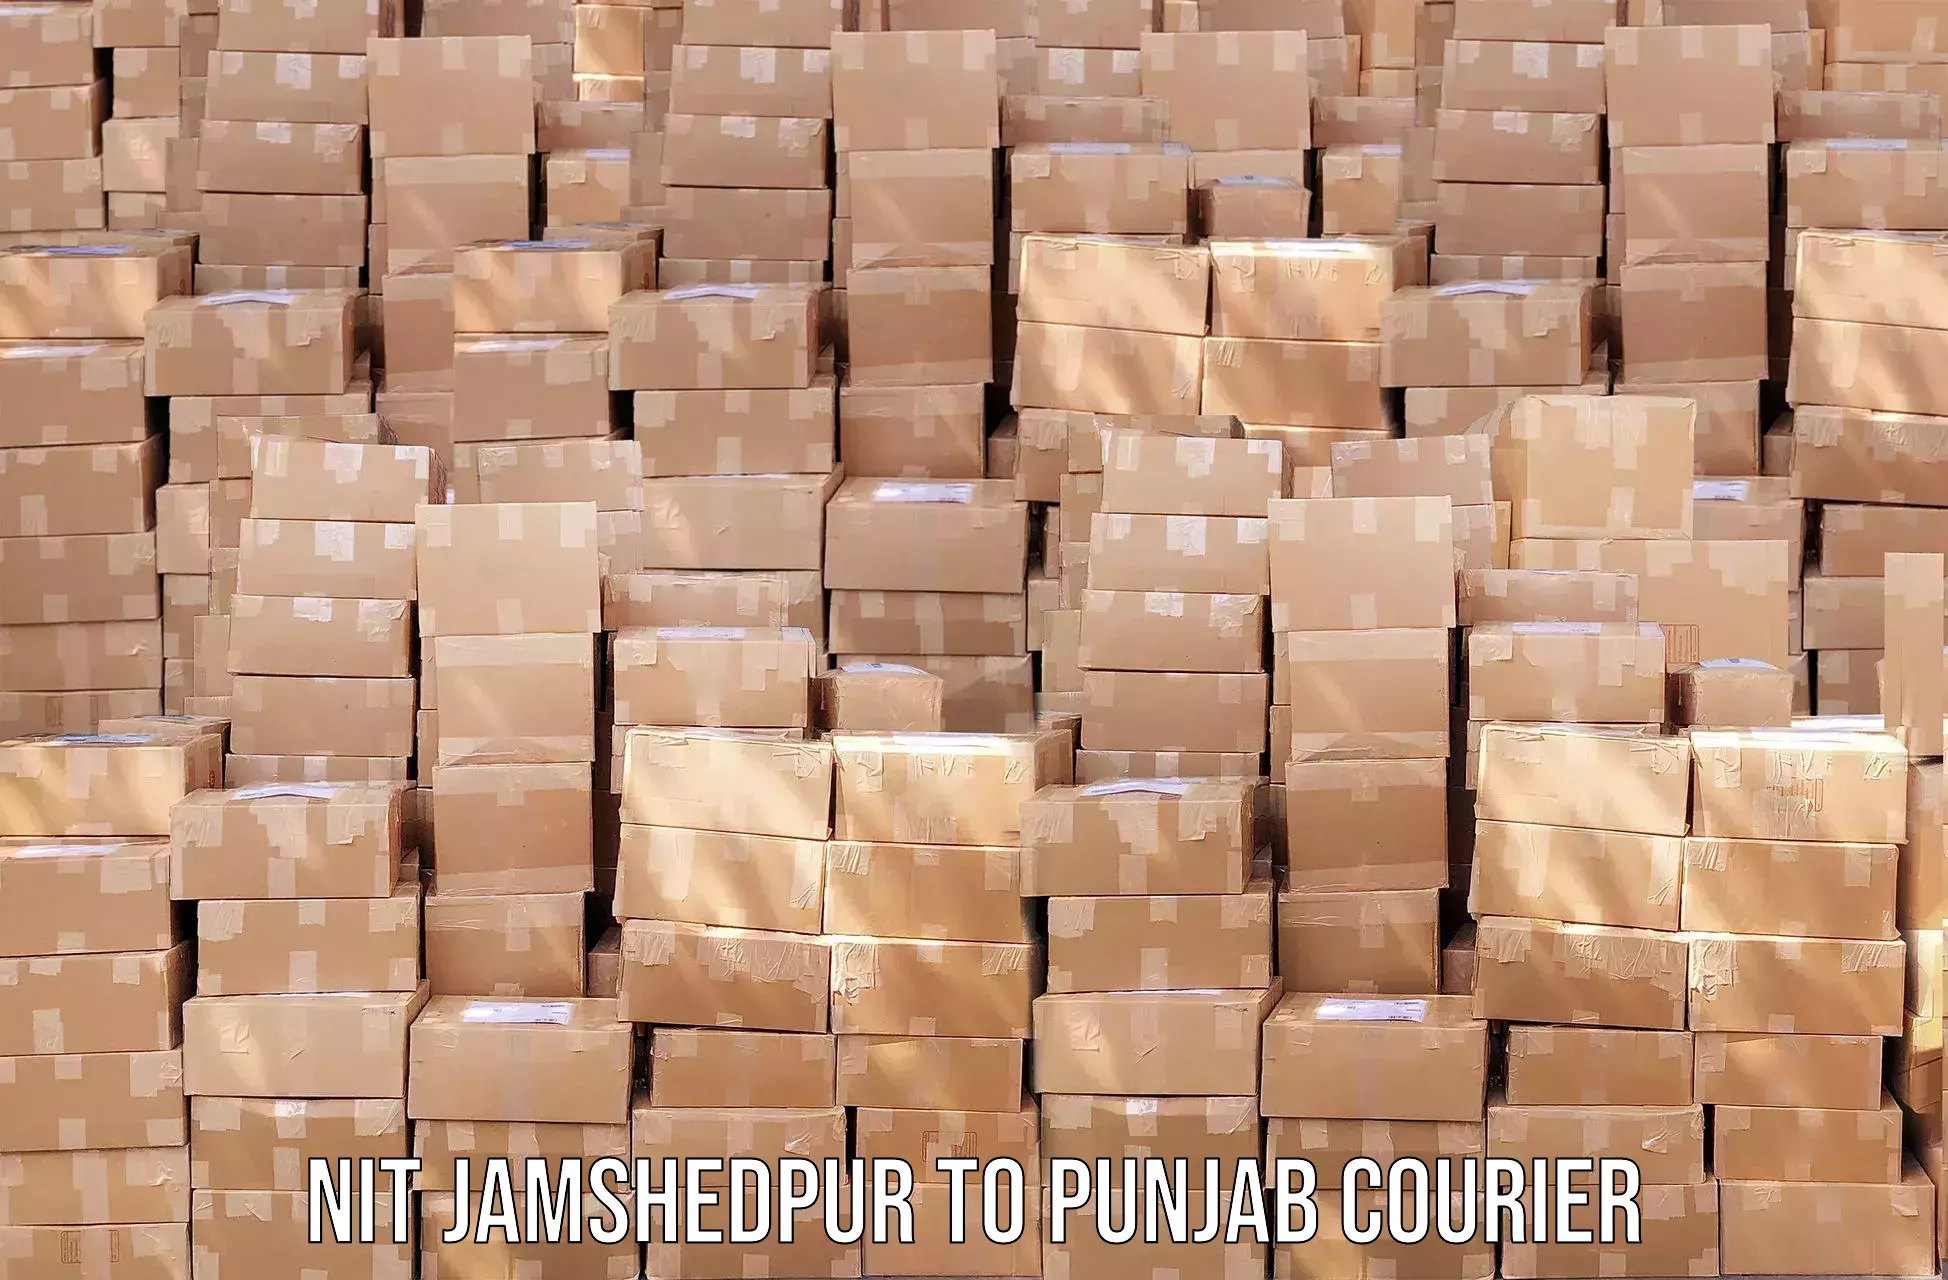 Next-day delivery options NIT Jamshedpur to Punjab